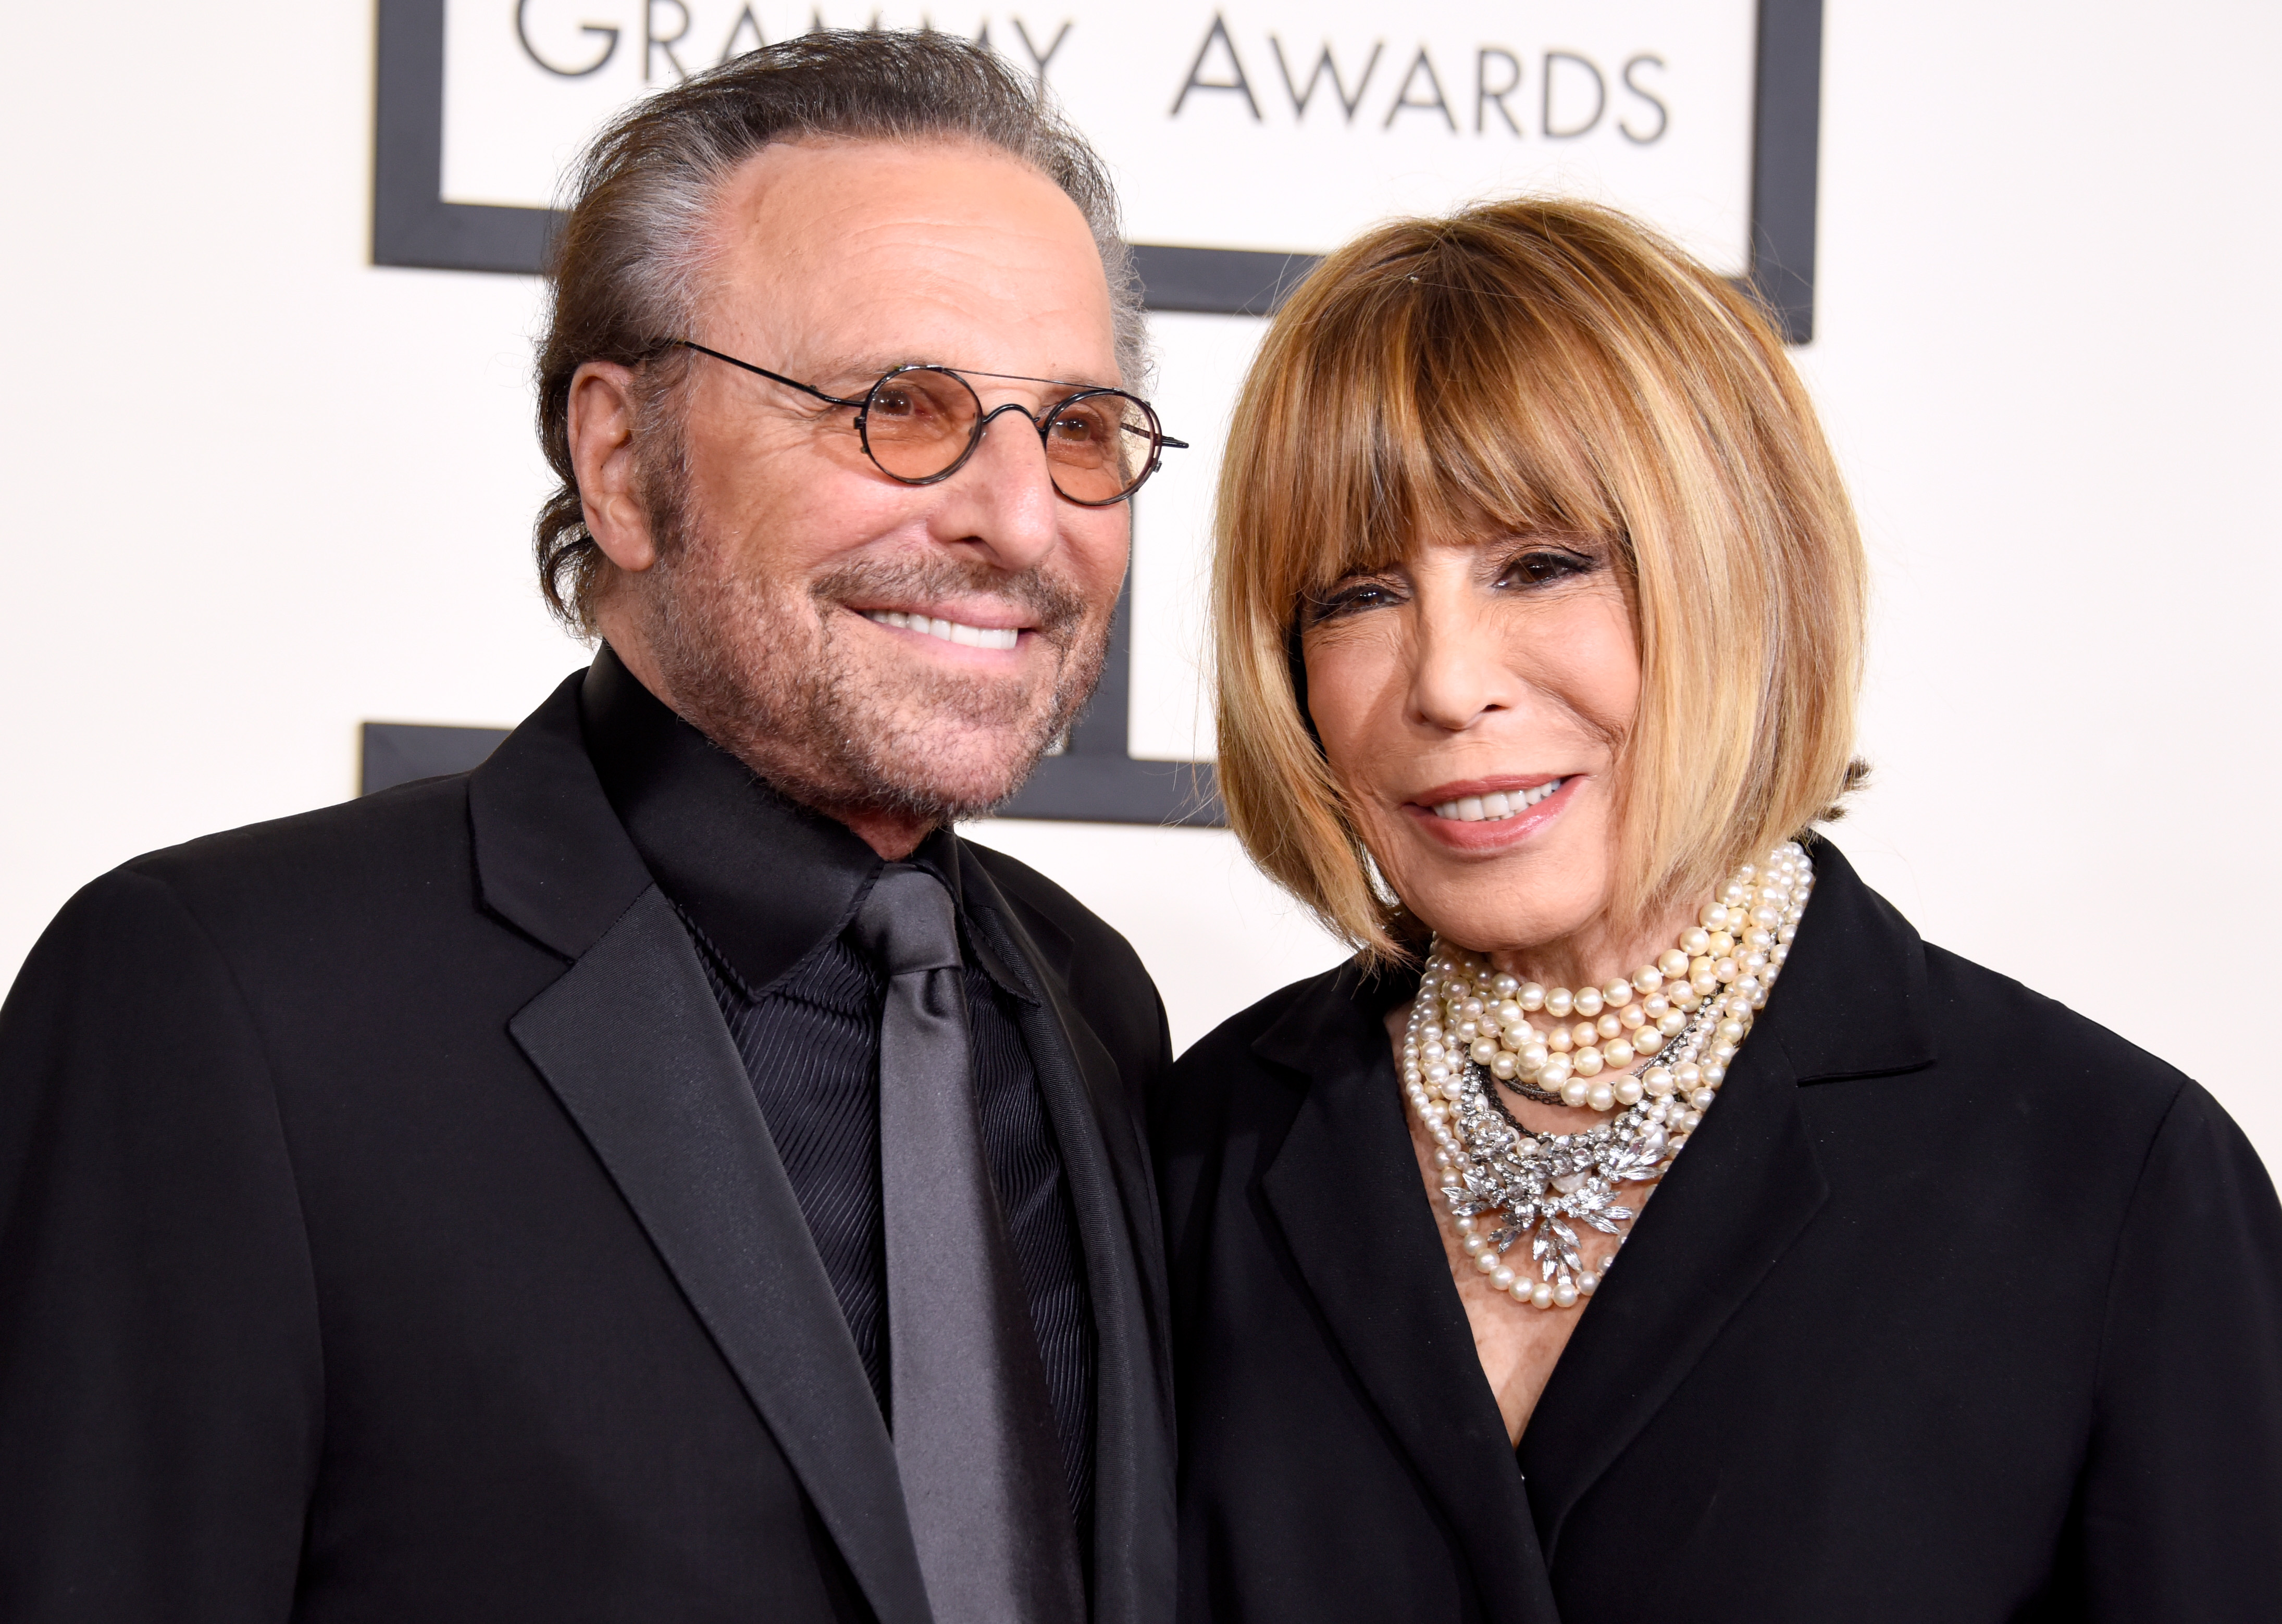 Barry Mann and Cynthia Weil are photographed at The 57th Annual GRAMMY Awards at the STAPLES Center on February 8, 2015 in Los Angeles, California | Source: Getty Images